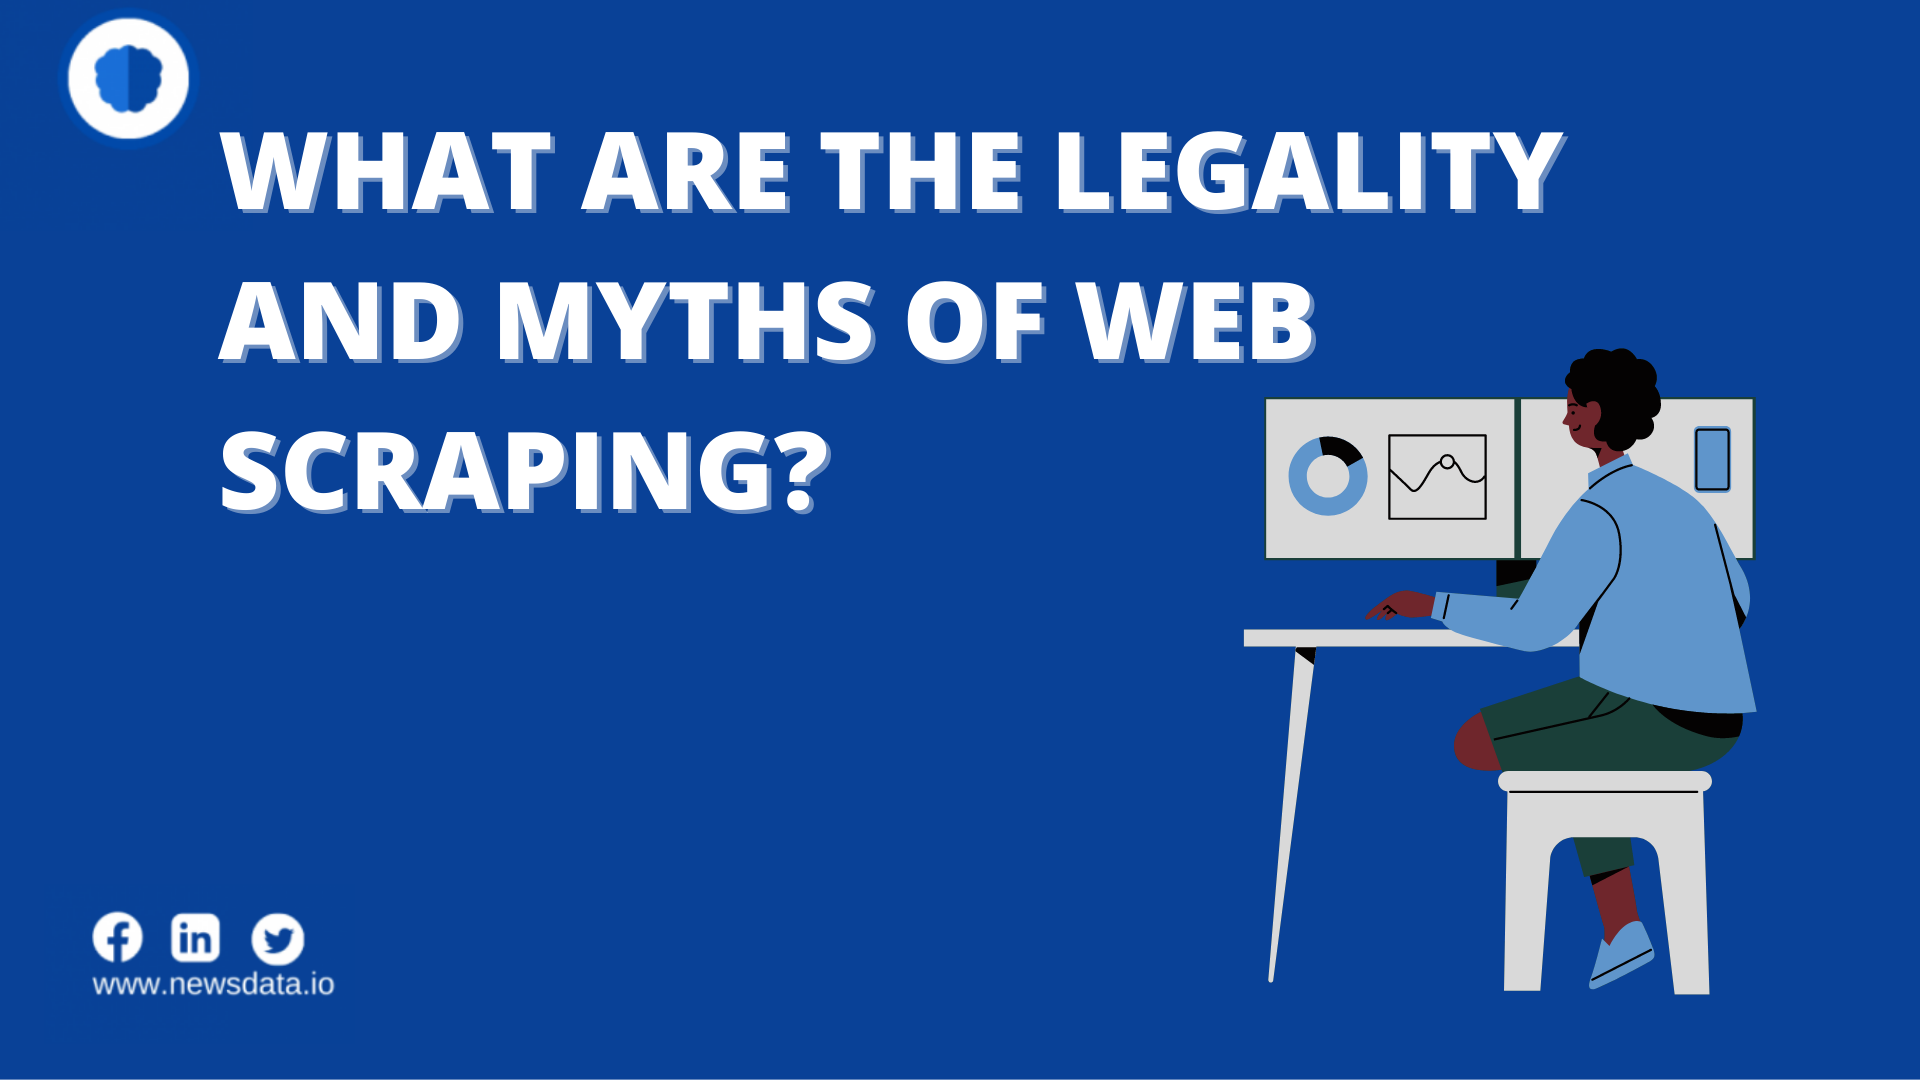 Legality and Myths of web scraping